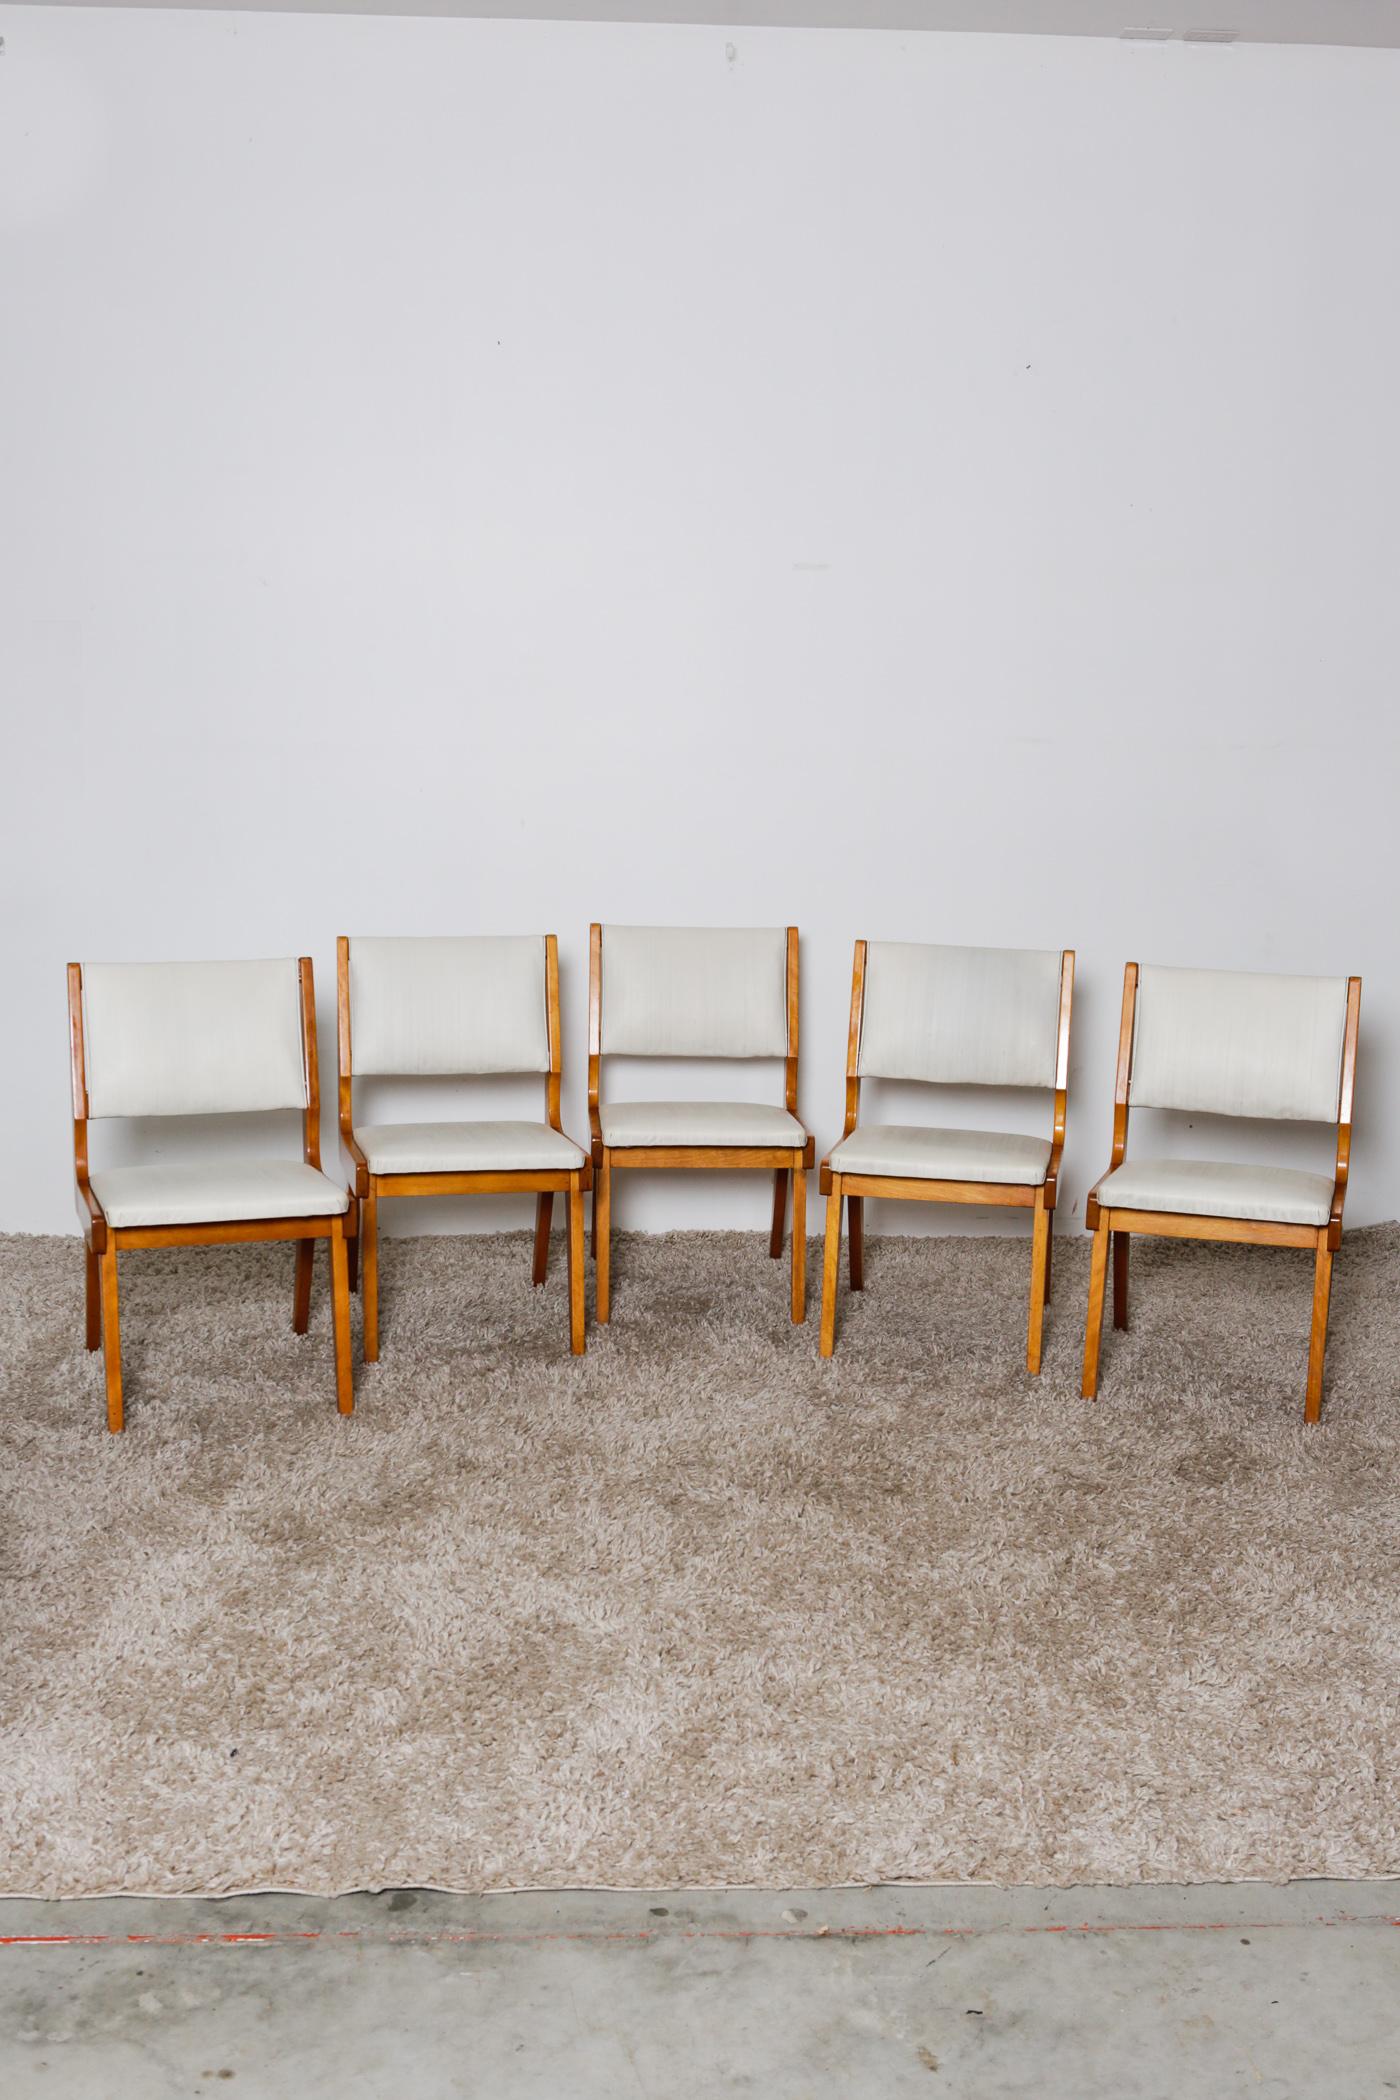 1960s Mid-Century Modern Maple Wood Dining Chairs #5976 by Feldman Brothers For Sale 1